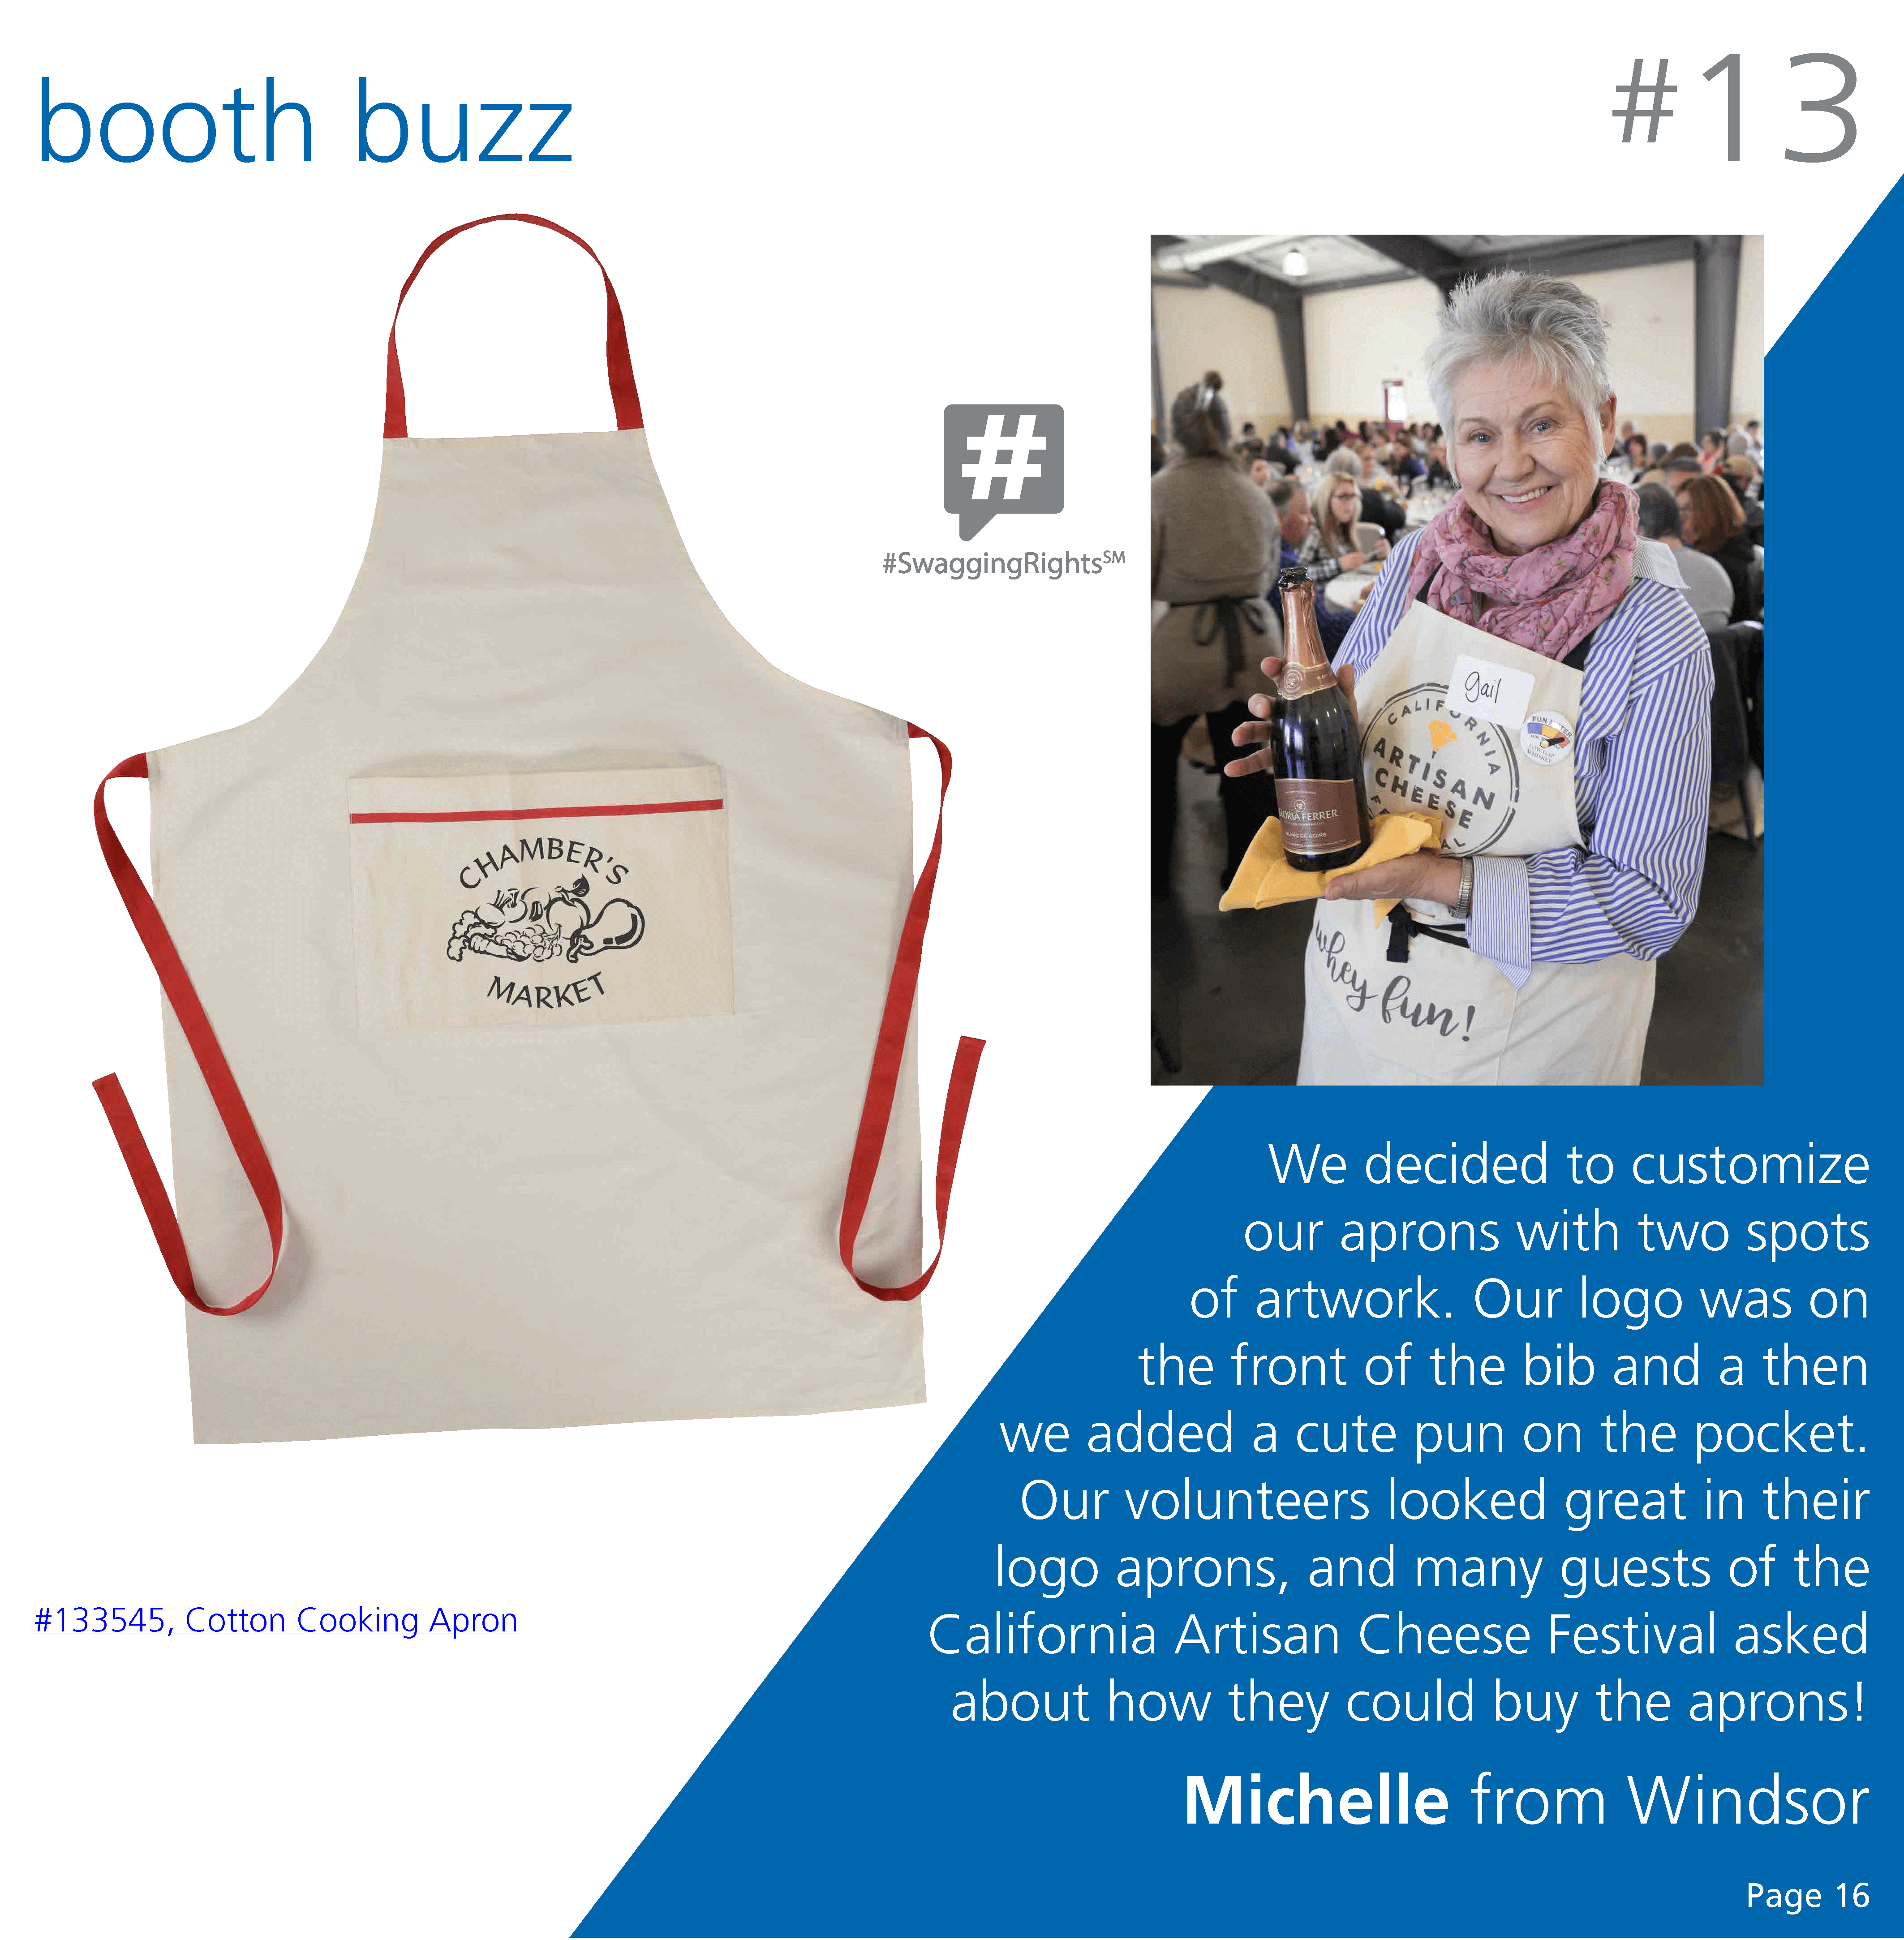 Cotton Cooking Apron from 4imprint